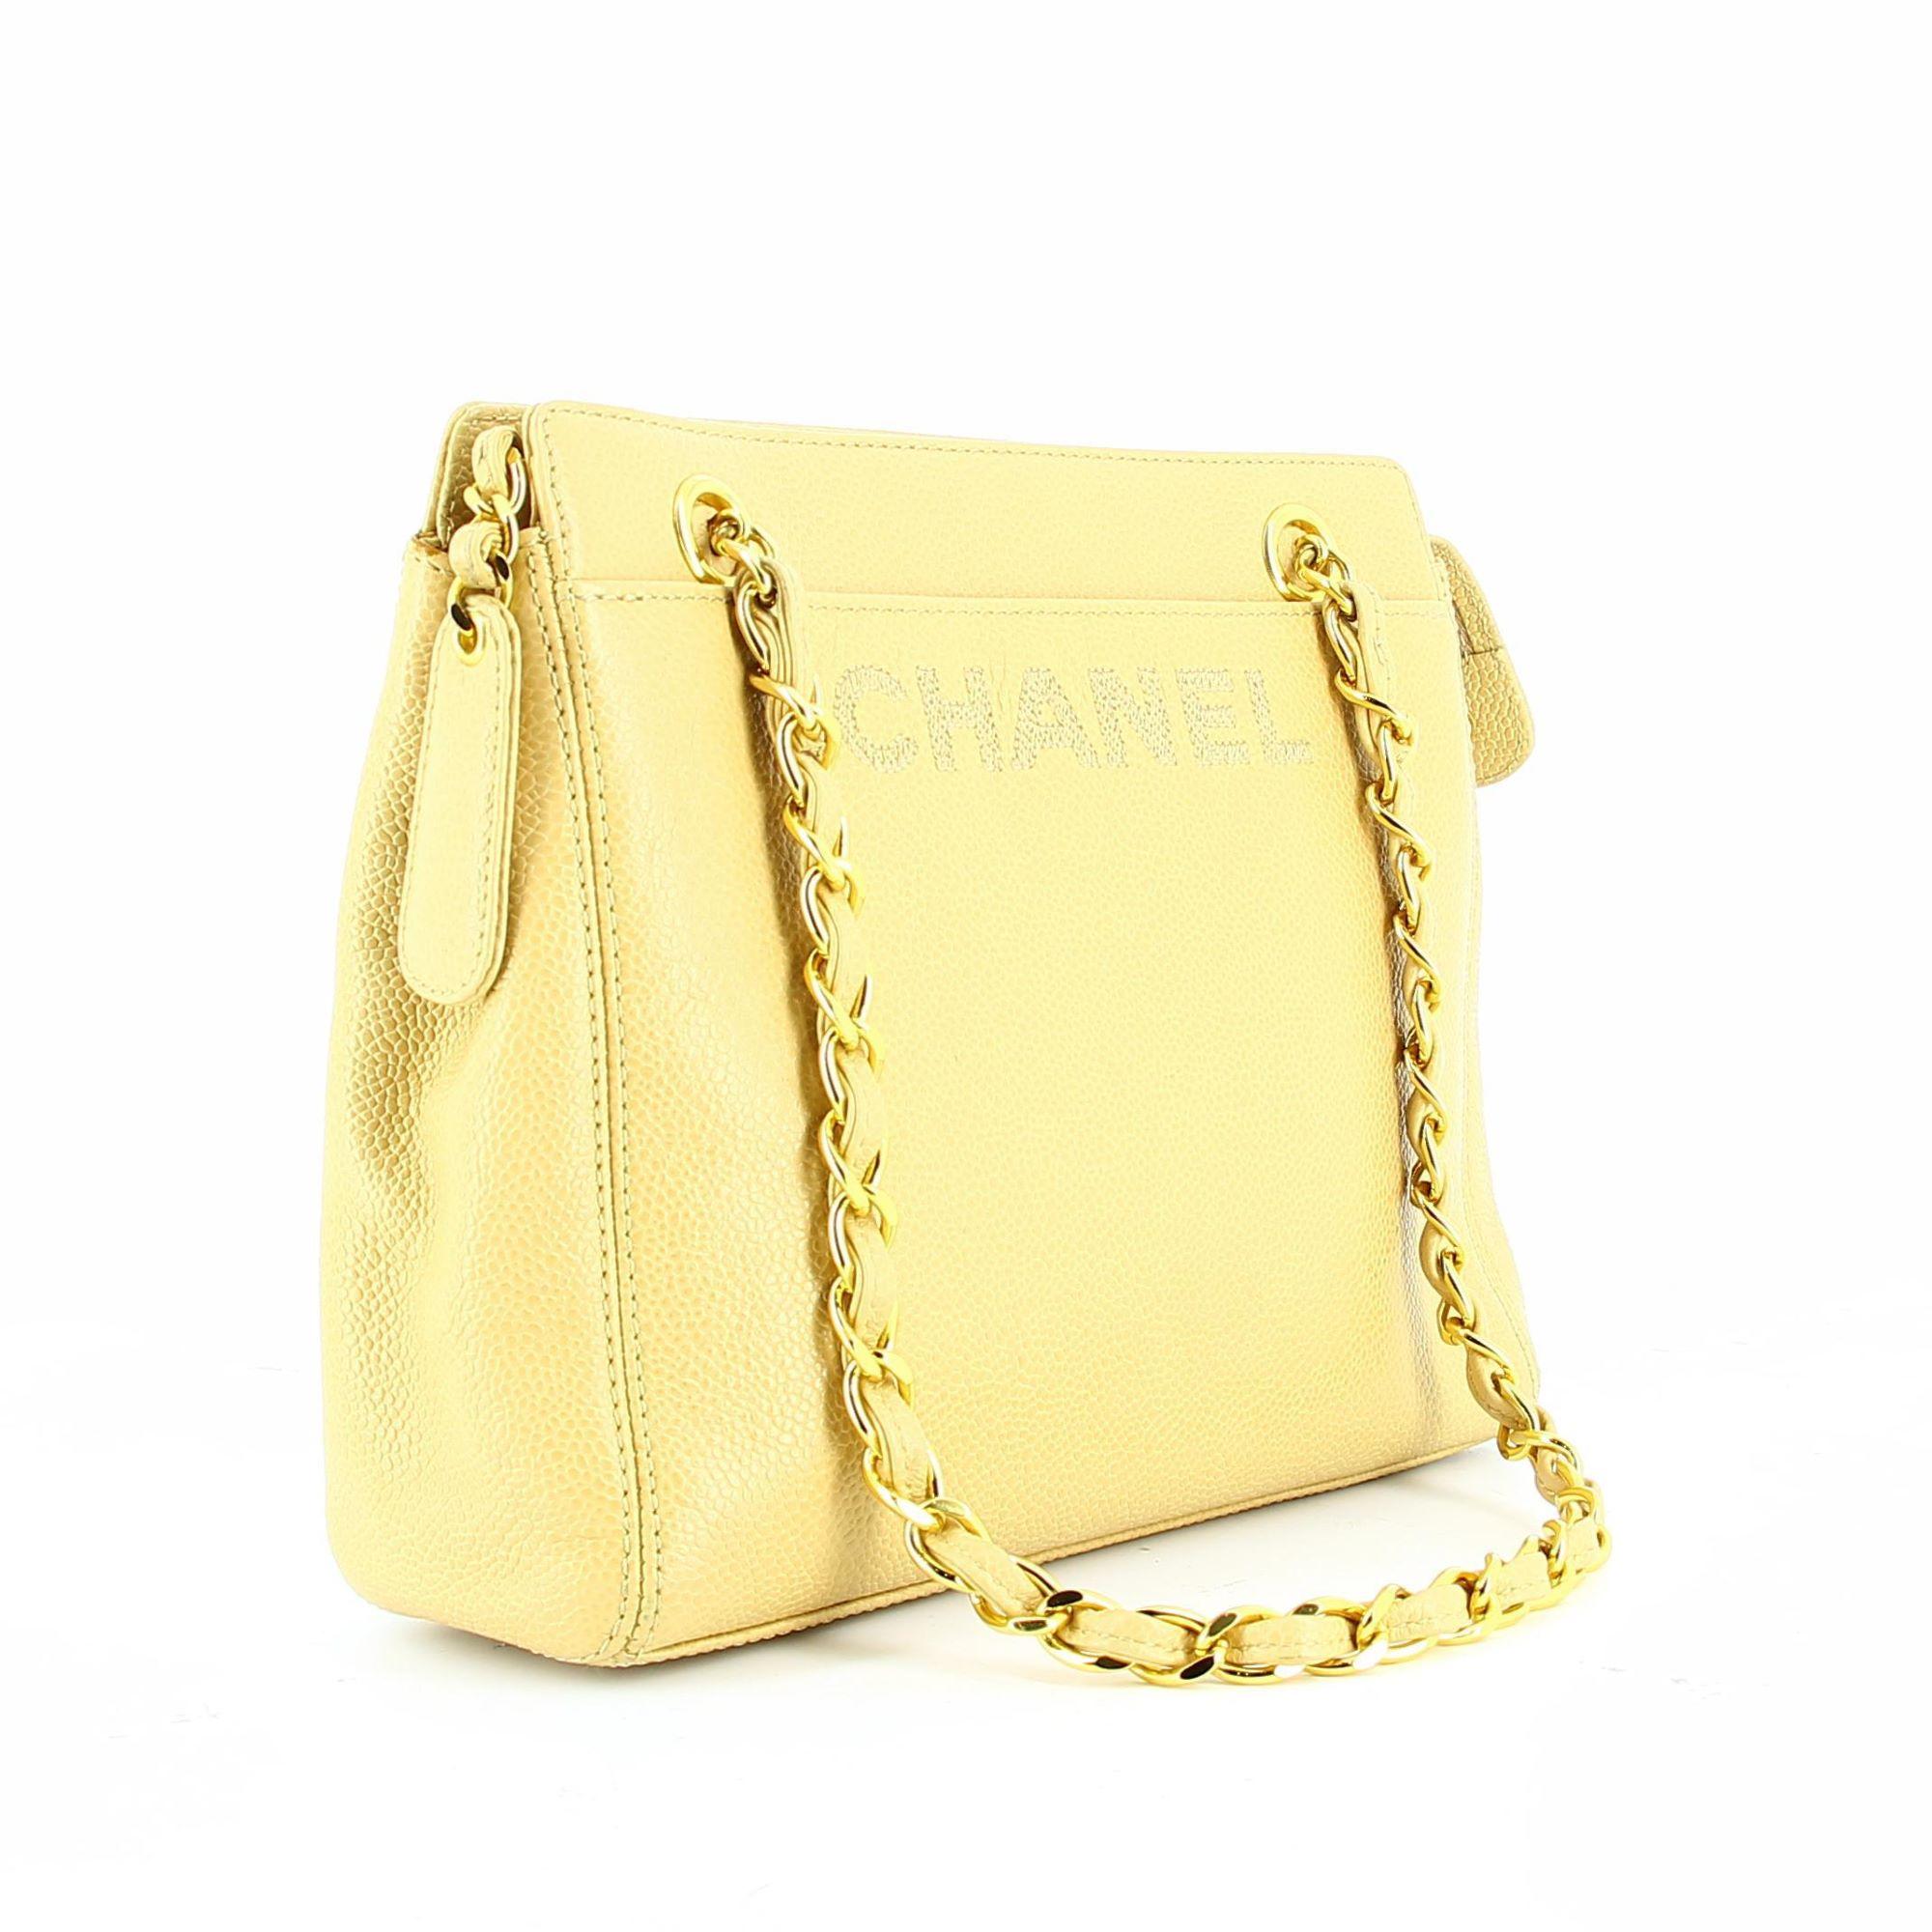 1990s Chanel Yellow Leather Bag 2